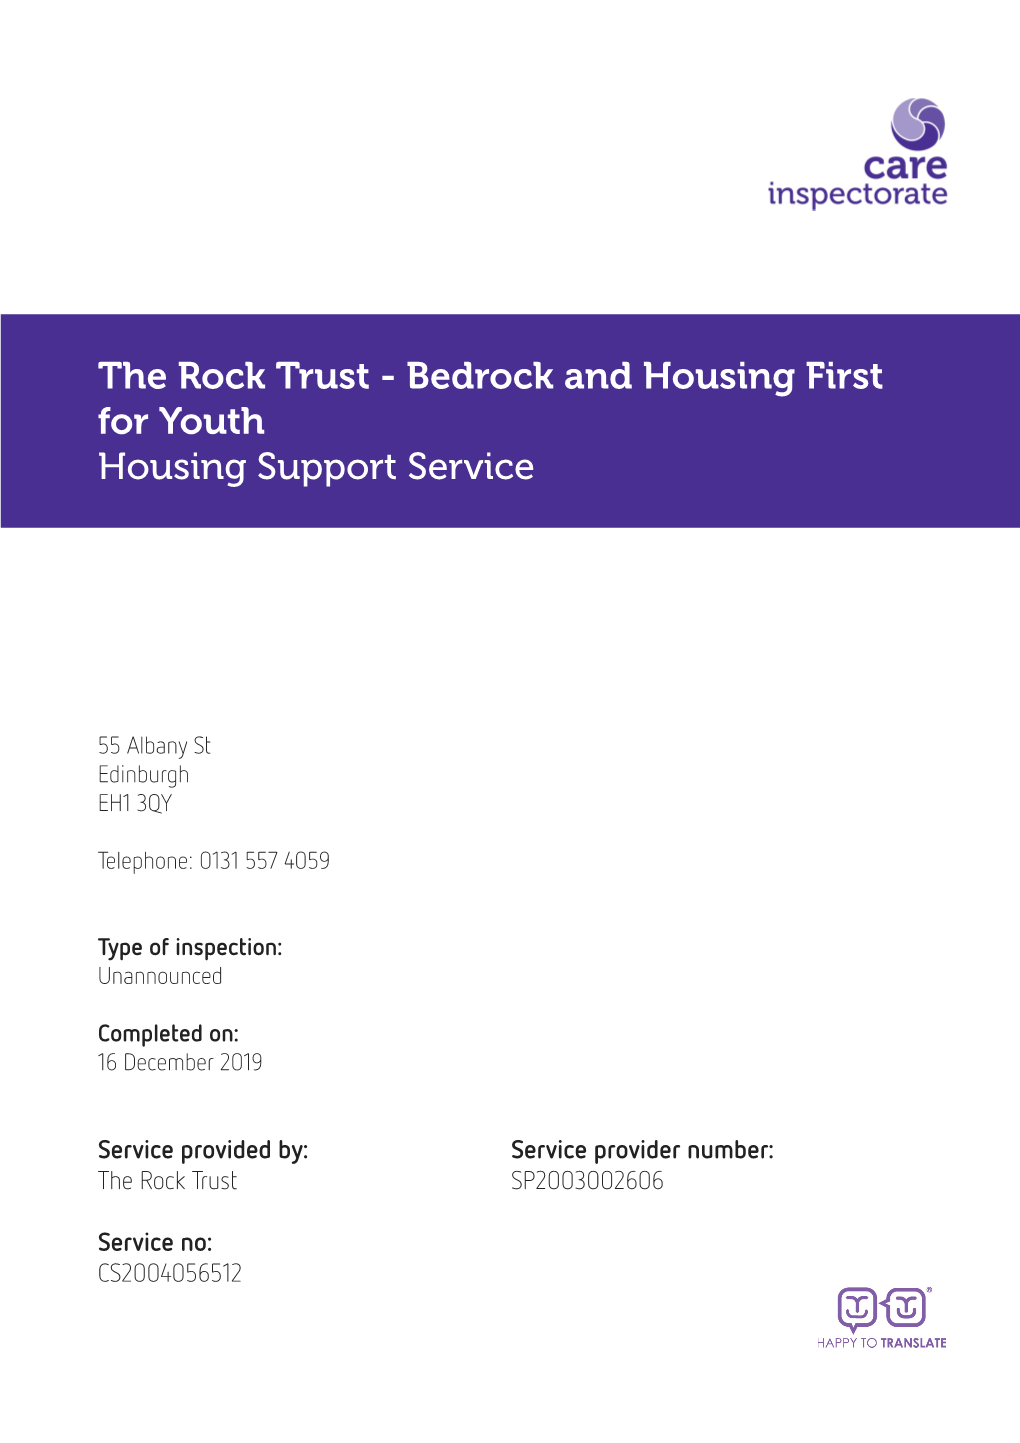 The Rock Trust - Bedrock and Housing First for Youth Housing Support Service